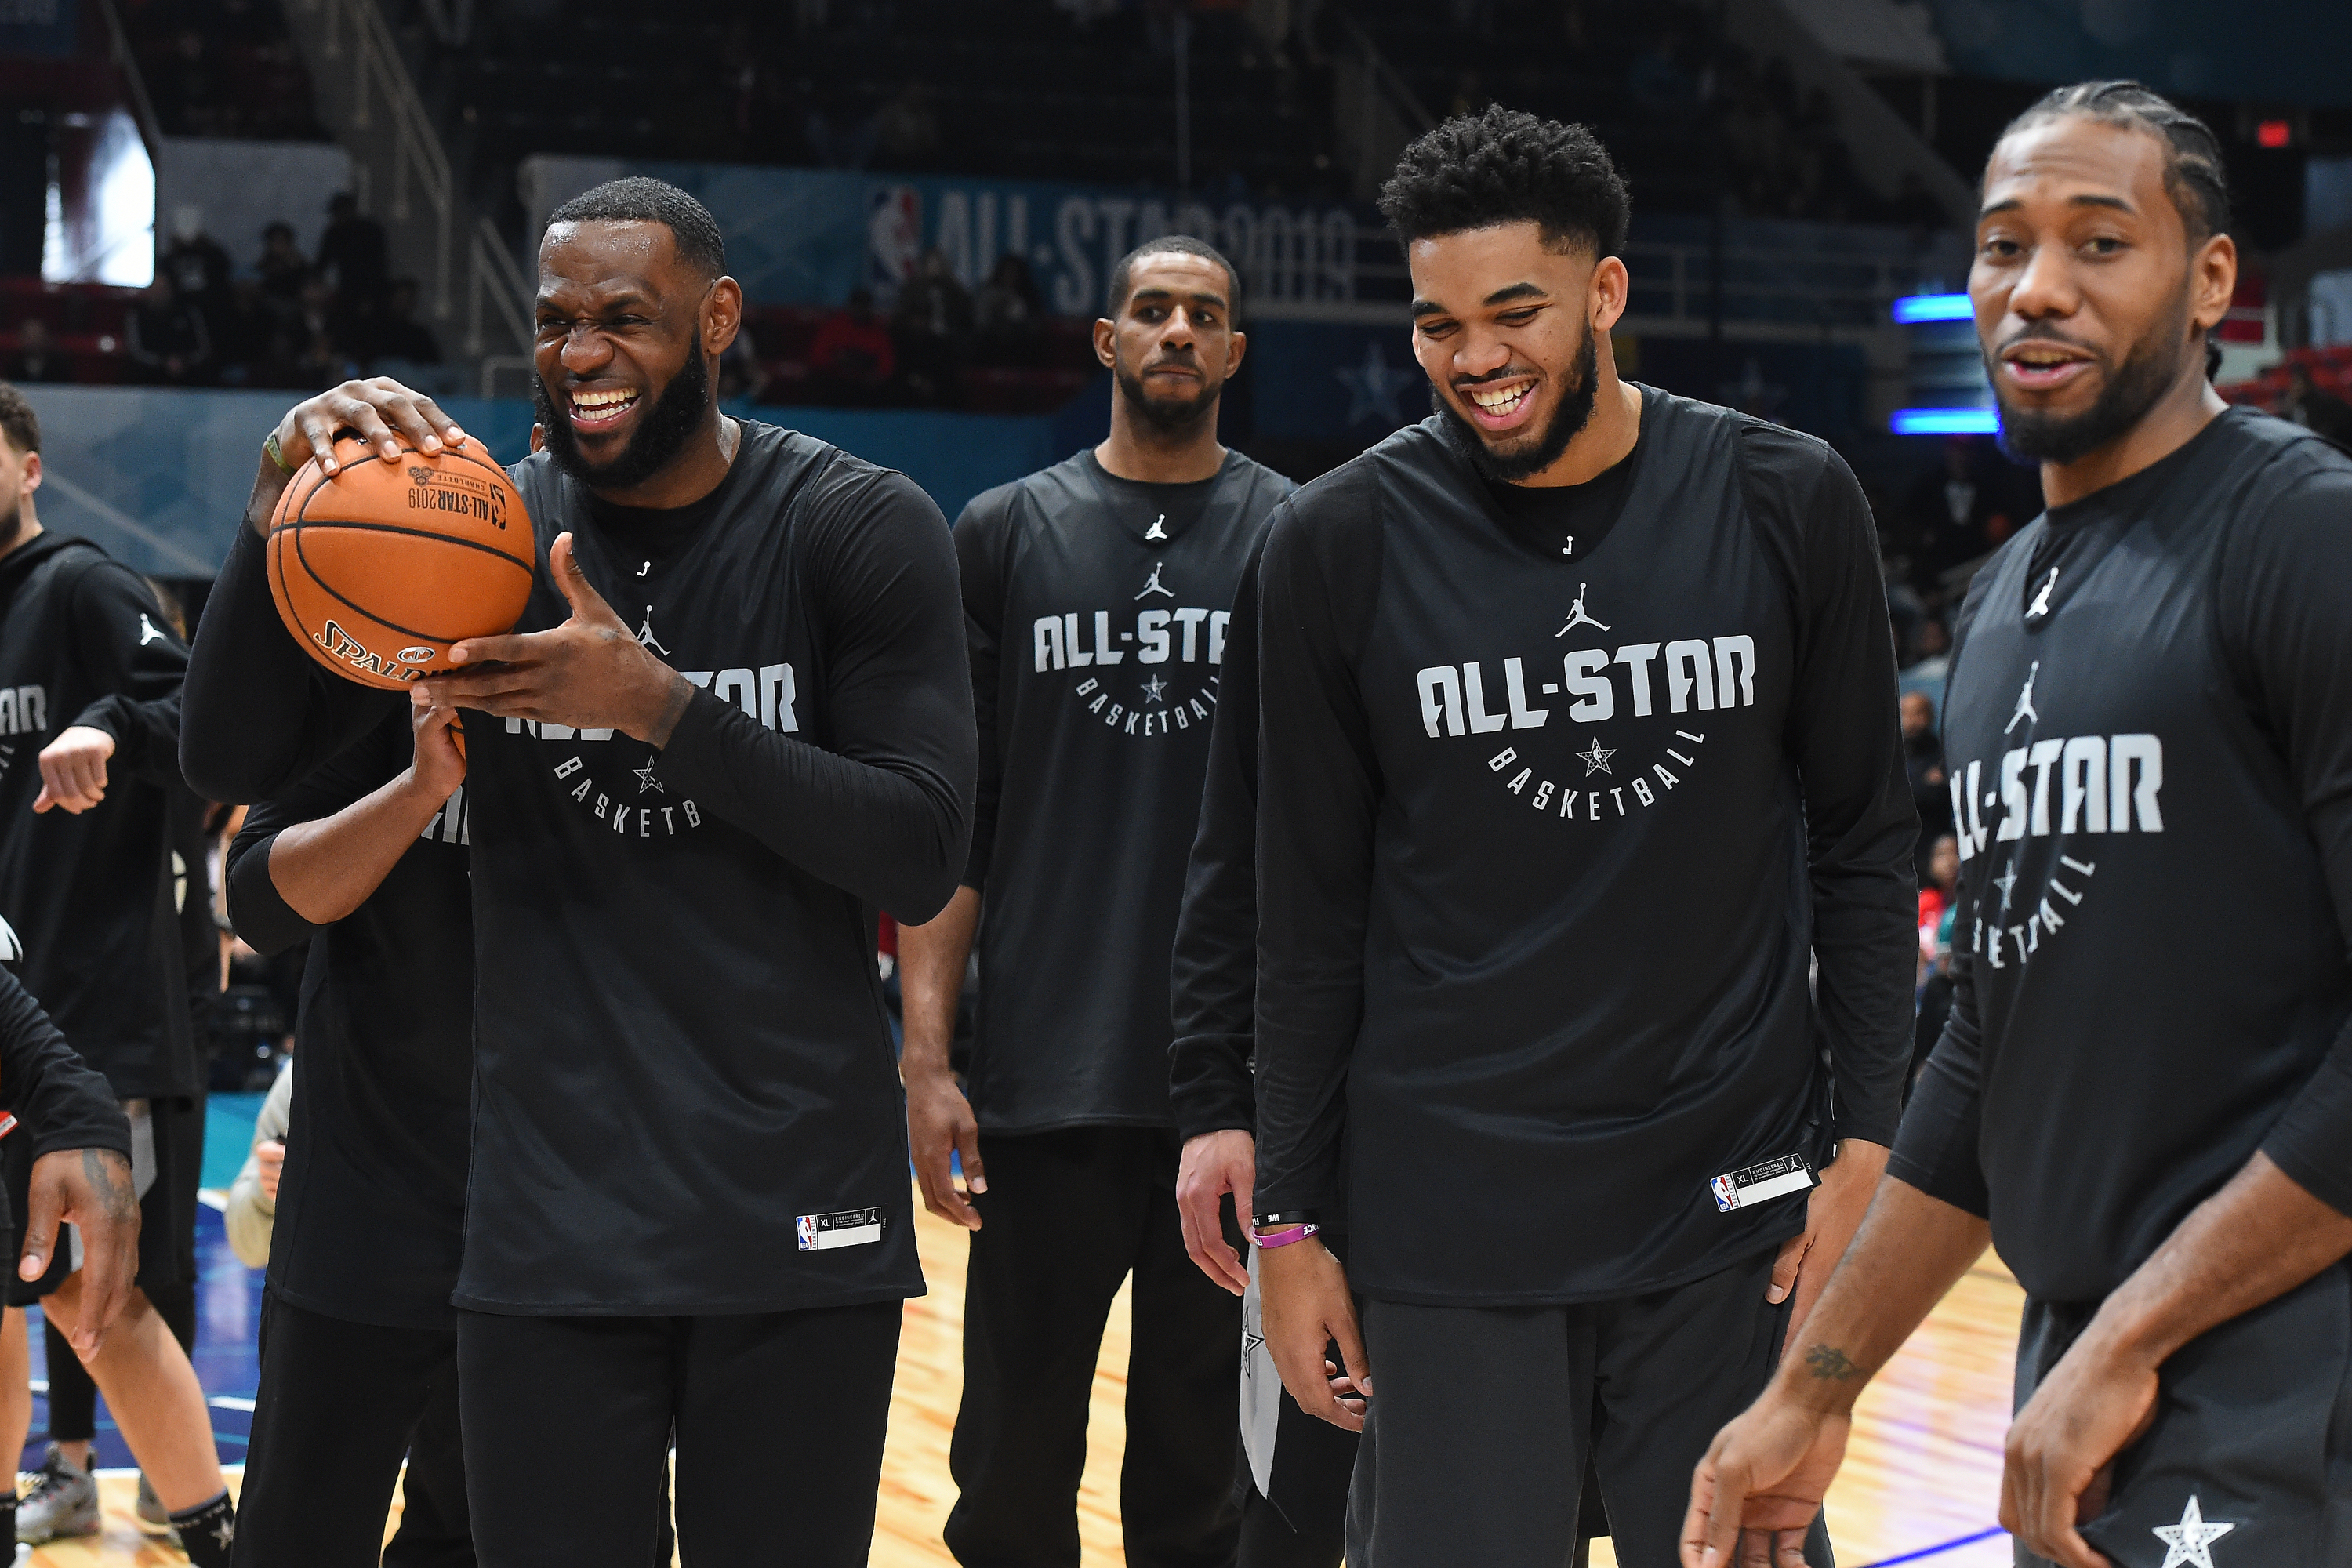 Nba All Star Weekend 2019 Last Minute Preview Predictions For All Star Game Bleacher Report Latest News Videos And Highlights